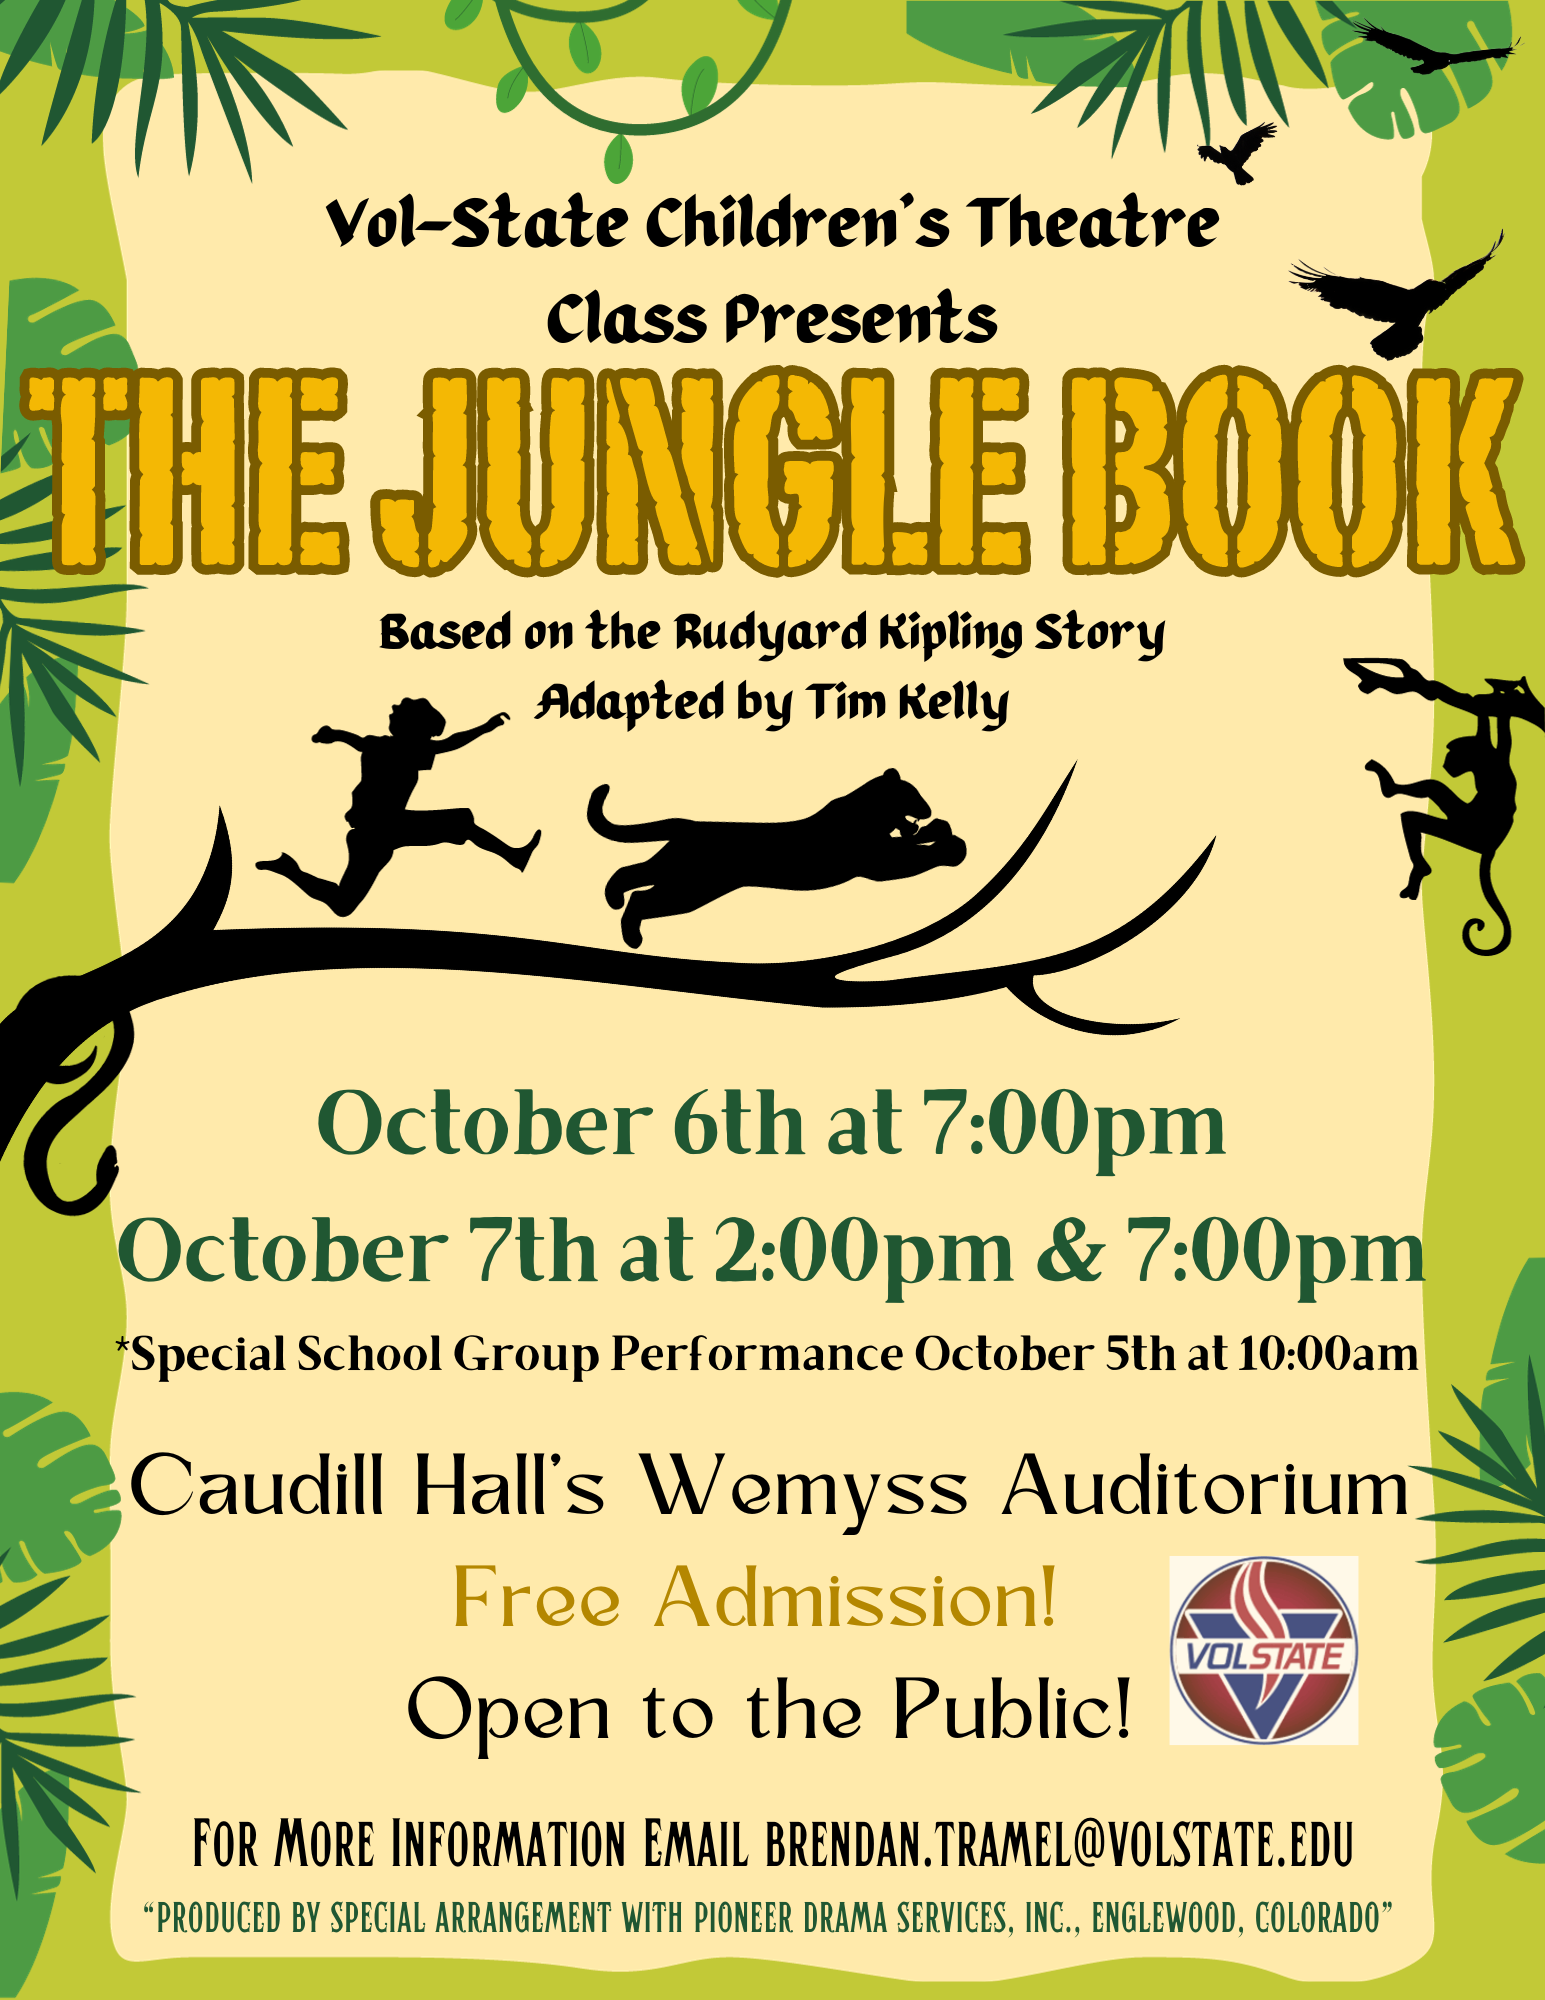 Vol State Children's Theatre Class presents The Jungle Book. Performances are October 6 at 7:00 pm and October 7 at 2:00 pm and 7:00 pm. Free admission and open to the public. The performance will be in Caudill Hall's Wemyss Auditorium on the Gallatin Campus.